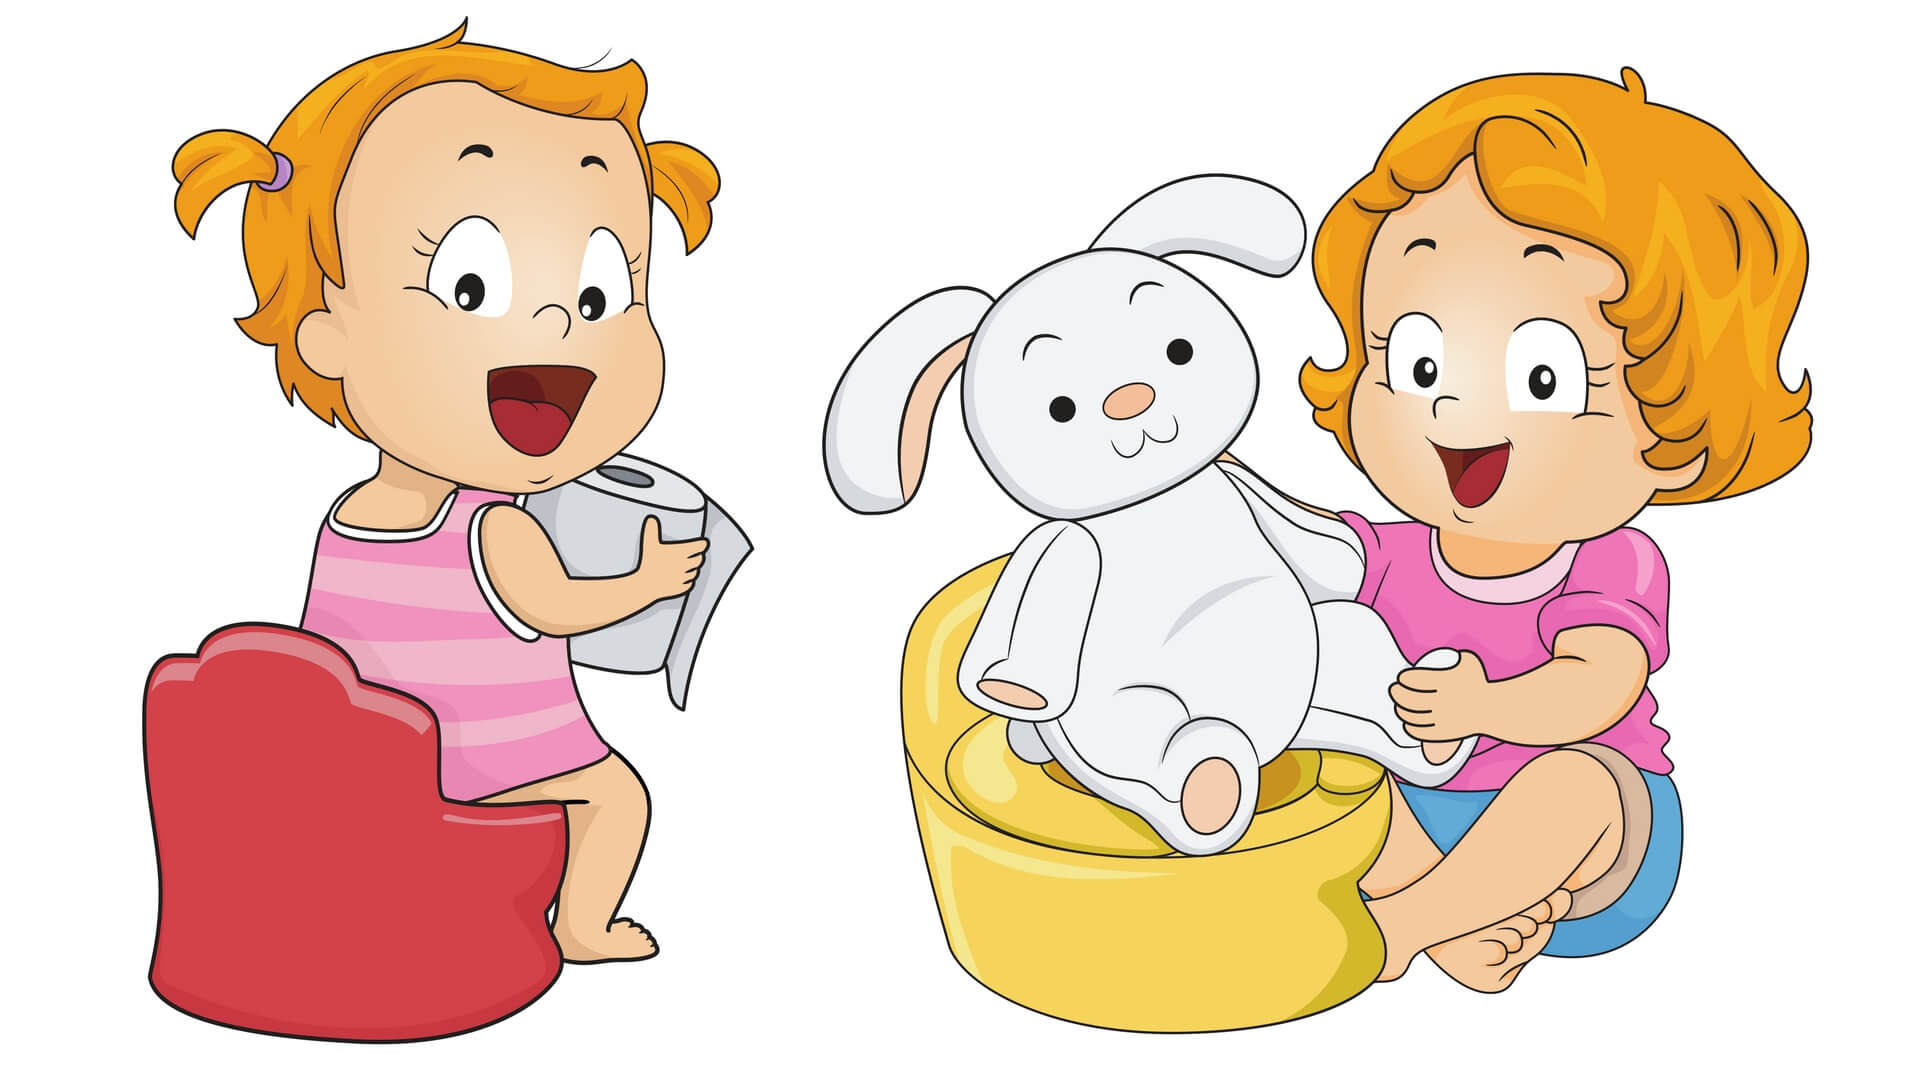 Preschool Potty Cliparts Free Download On Clipartmag